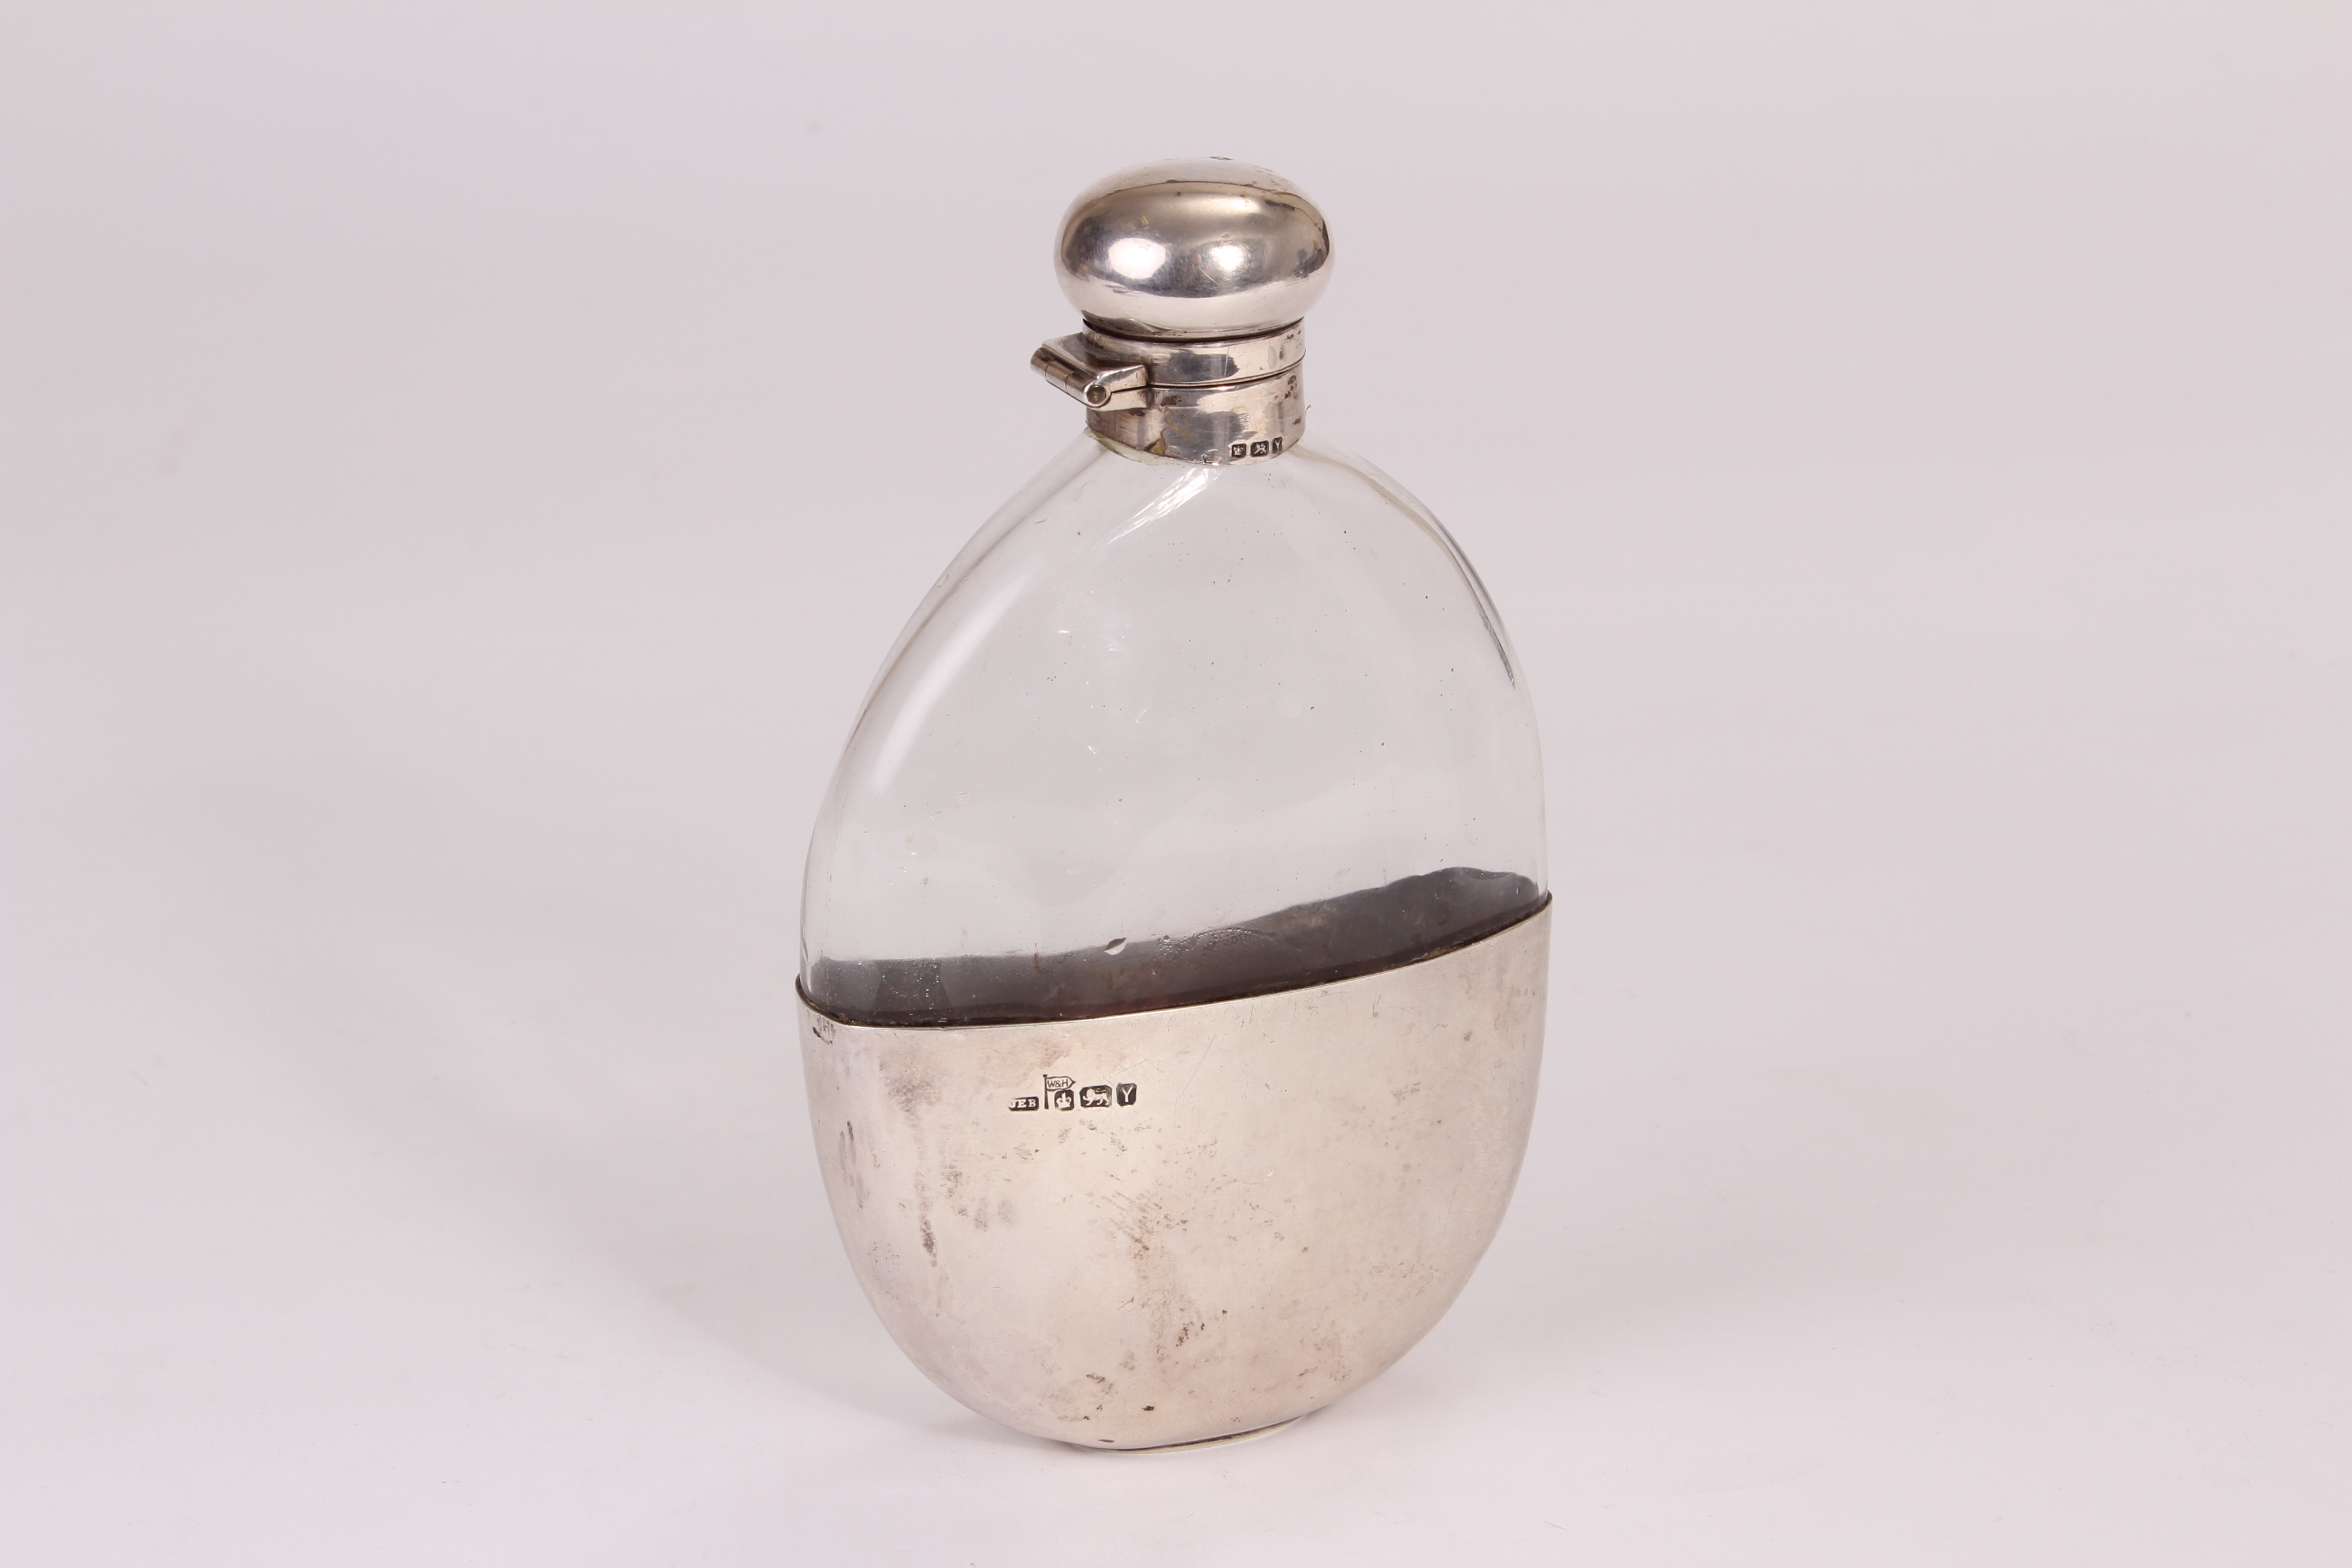 A late Victorian silver and glass hip flask from Walker & Hall, oval shaped glass vessel with silver